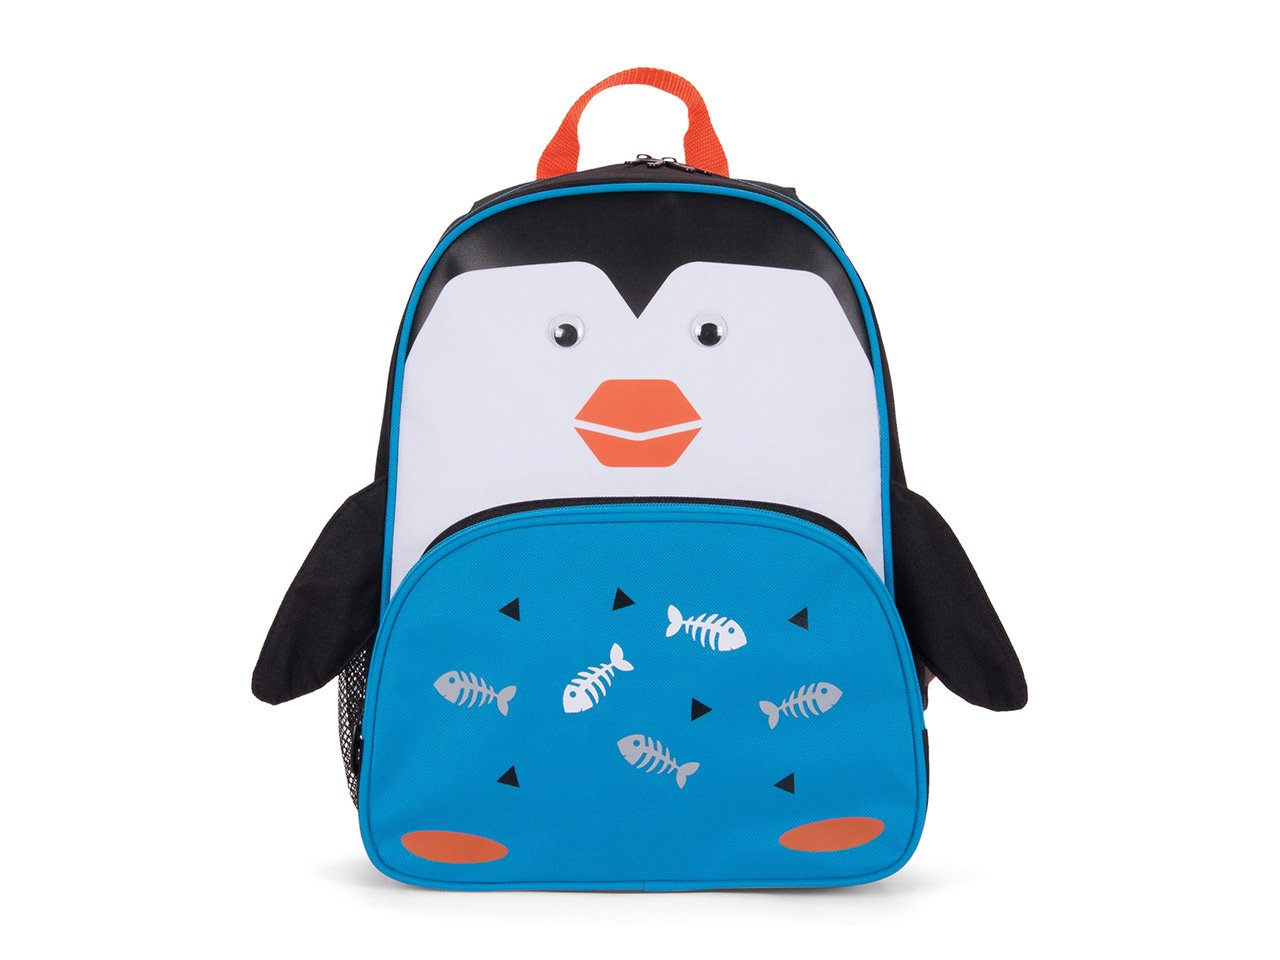 Good Backpacks For Middle Schoolers